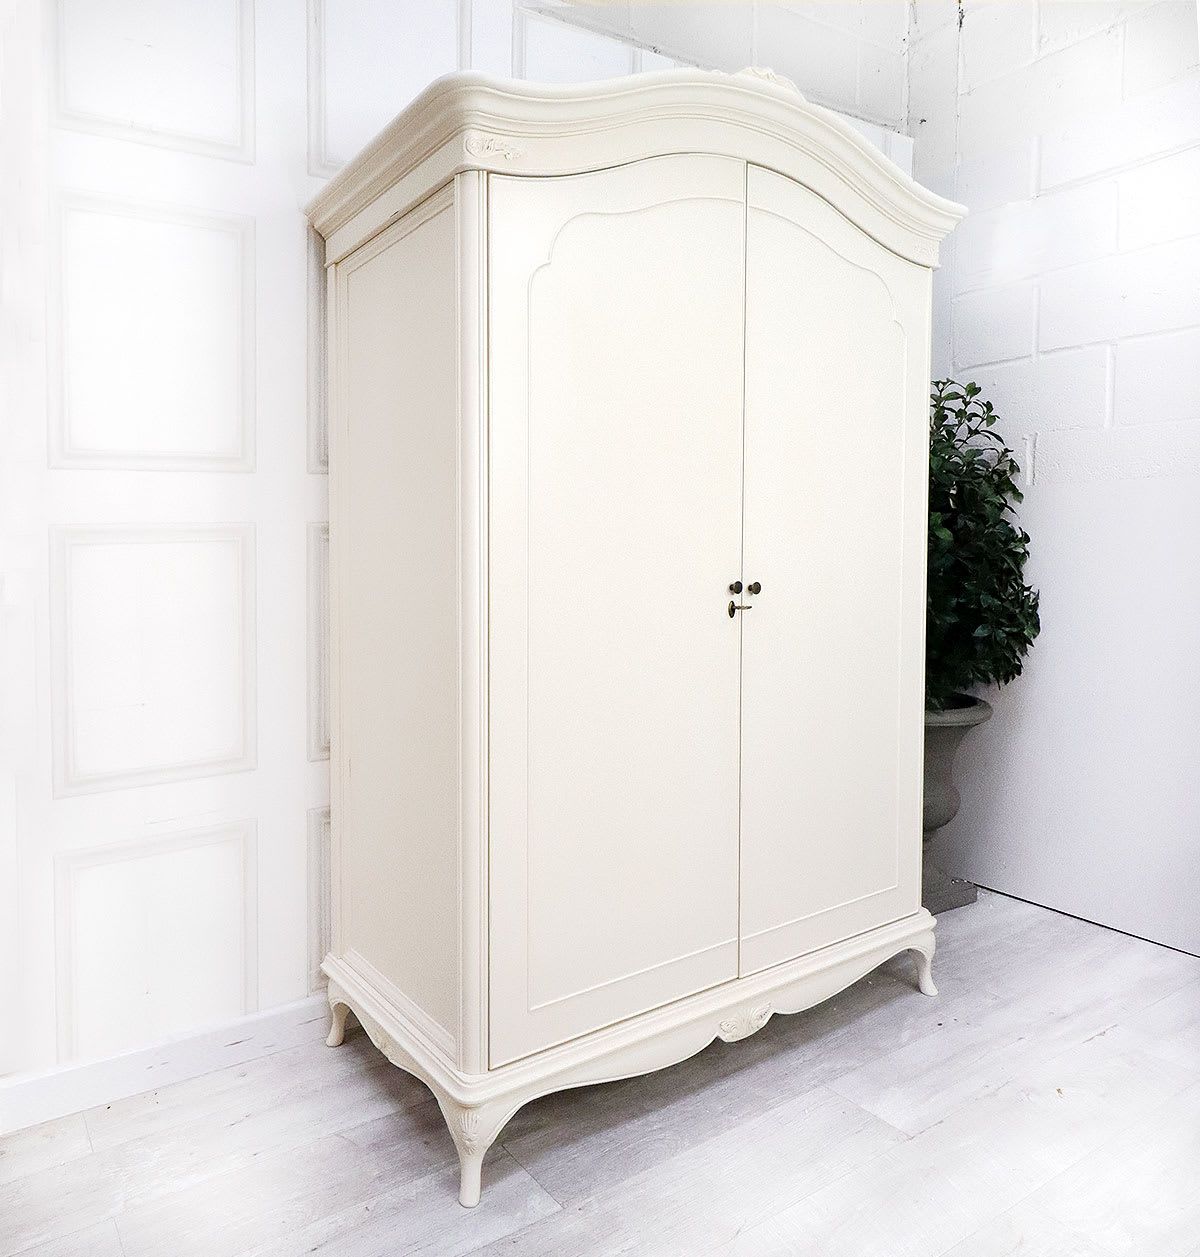 Willis & Gambier French Style Ivory Large Armoire Wardrobe | Nicky Cornell  A Uk Stockist Throughout White French Style Wardrobes (View 11 of 20)